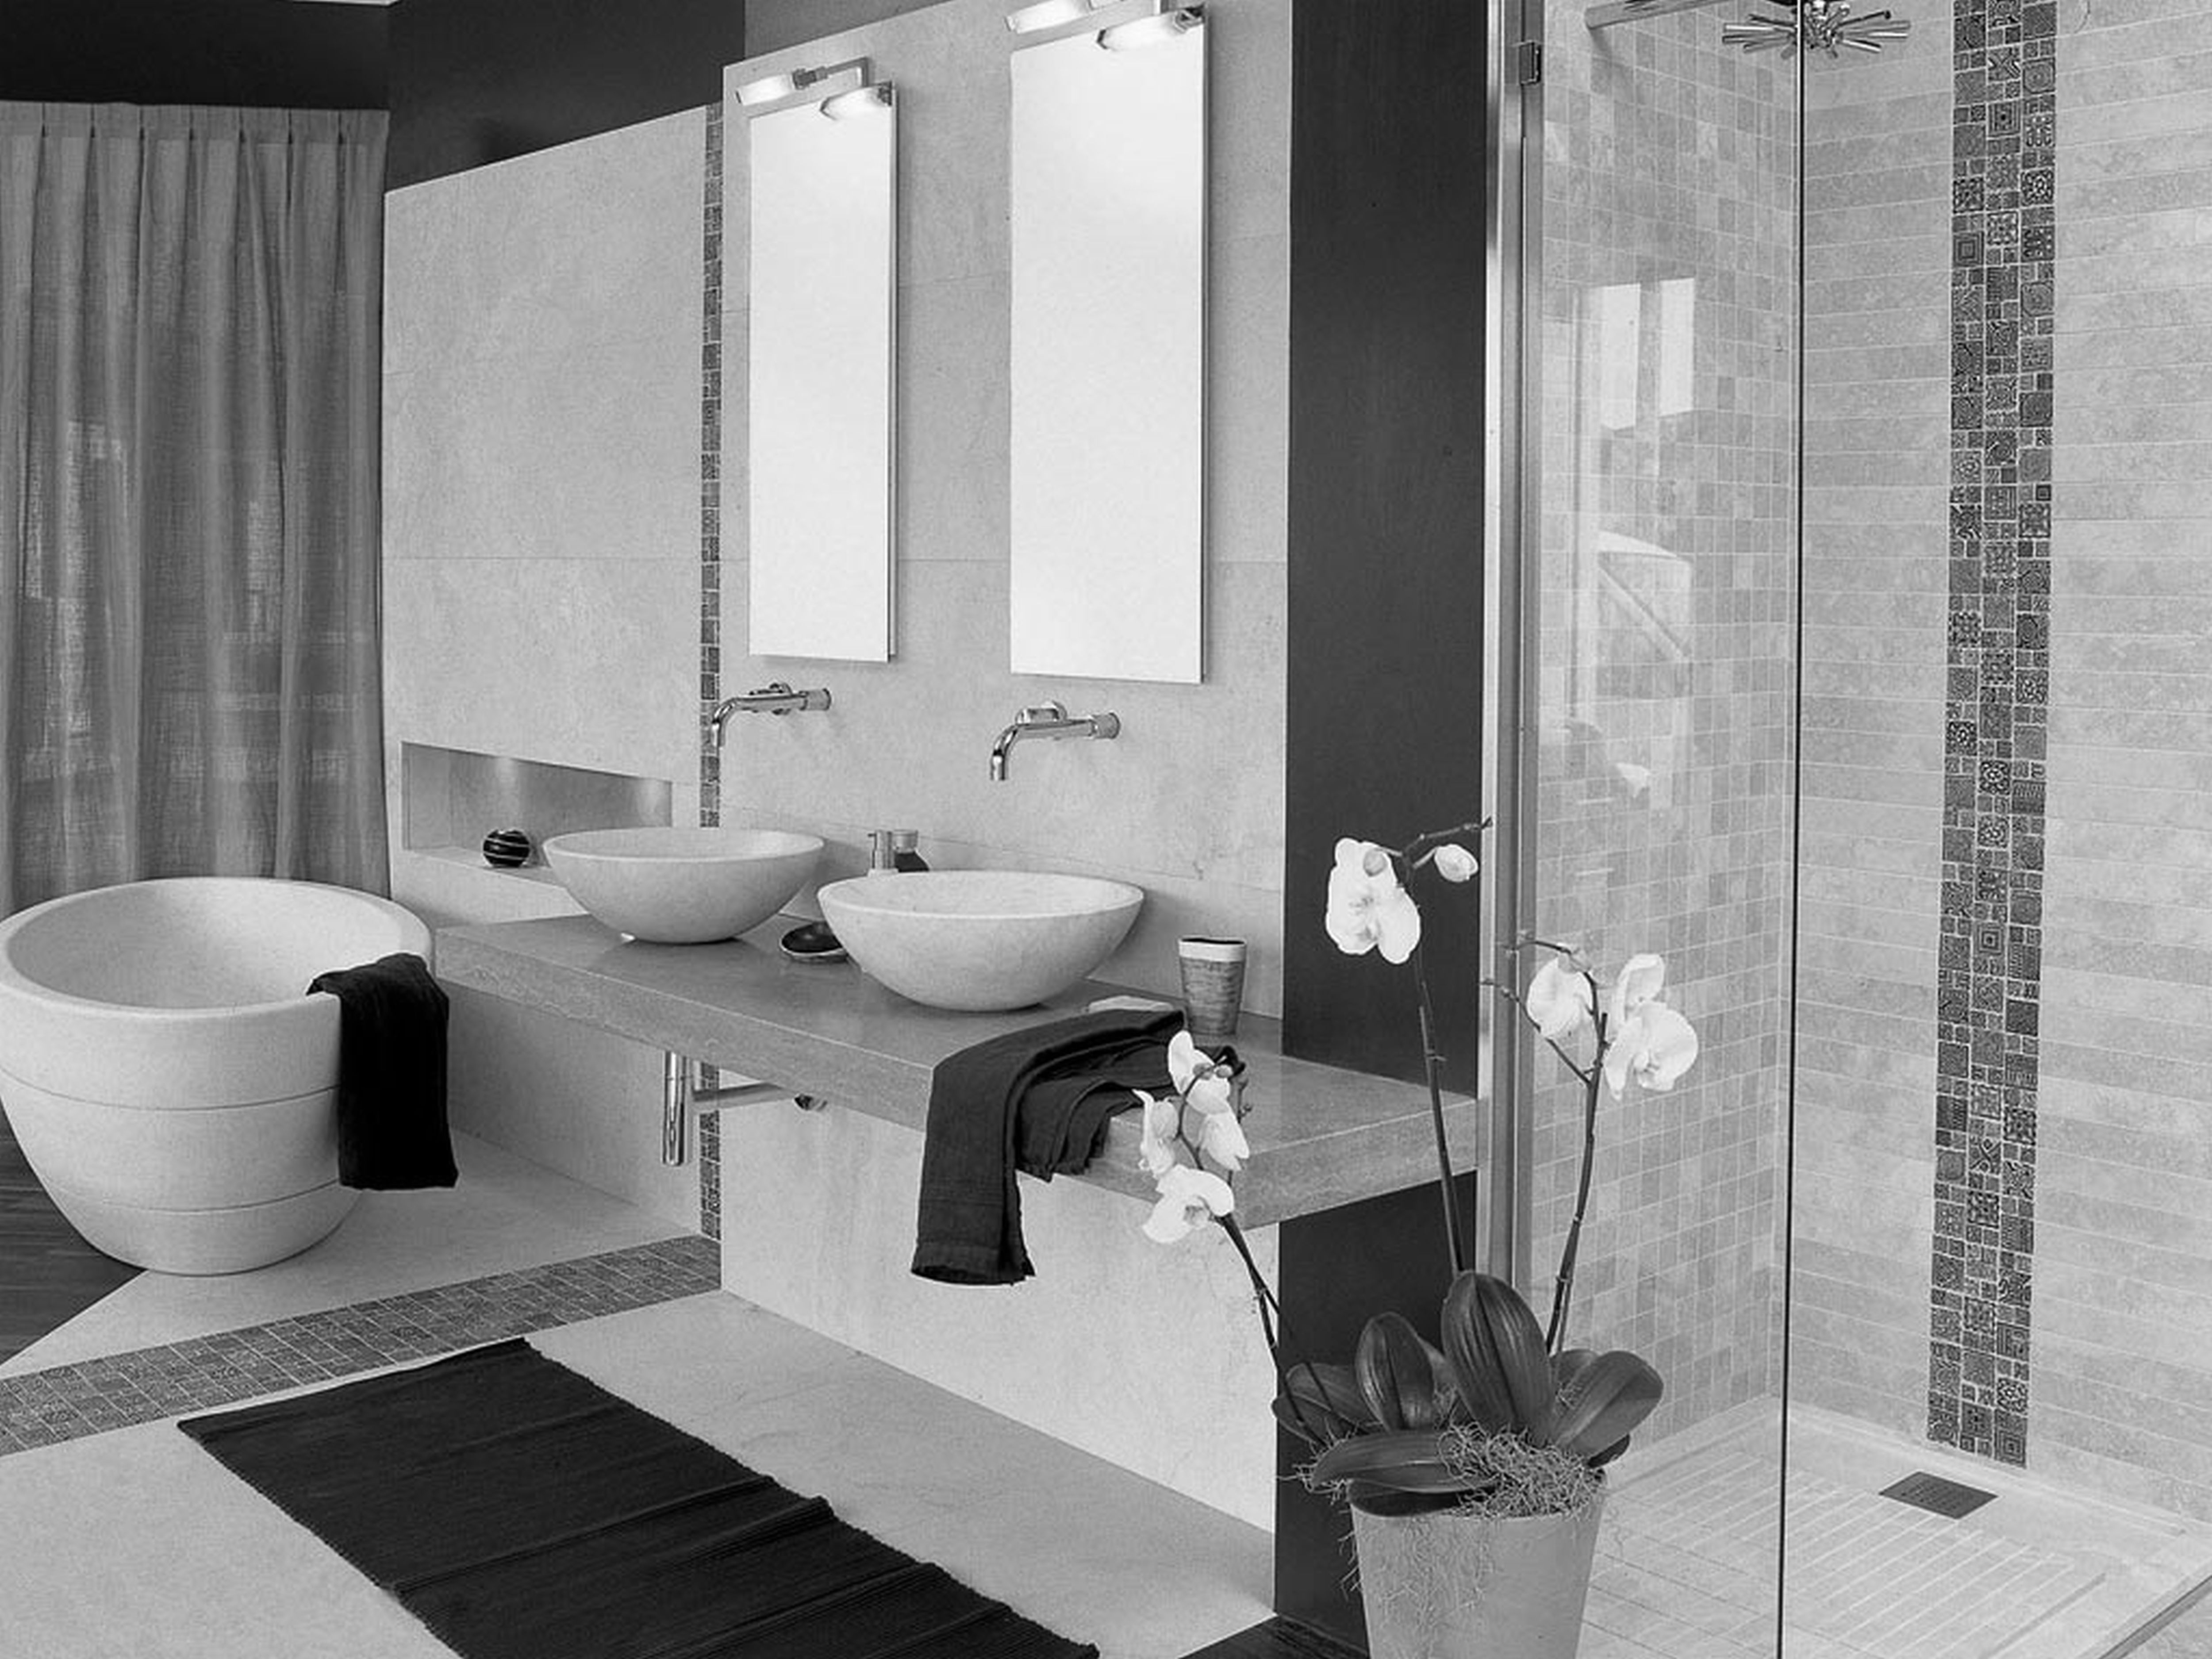 bathroom-flooring-astonishing-black-and-white-tile-bathroom-with-bowl-white-sink-on-low-vanities-bath-as-well-as-glass-cubicle-stand-shower-in-modern-hotel-bathroom-designs-hairy-black-and-white-tile